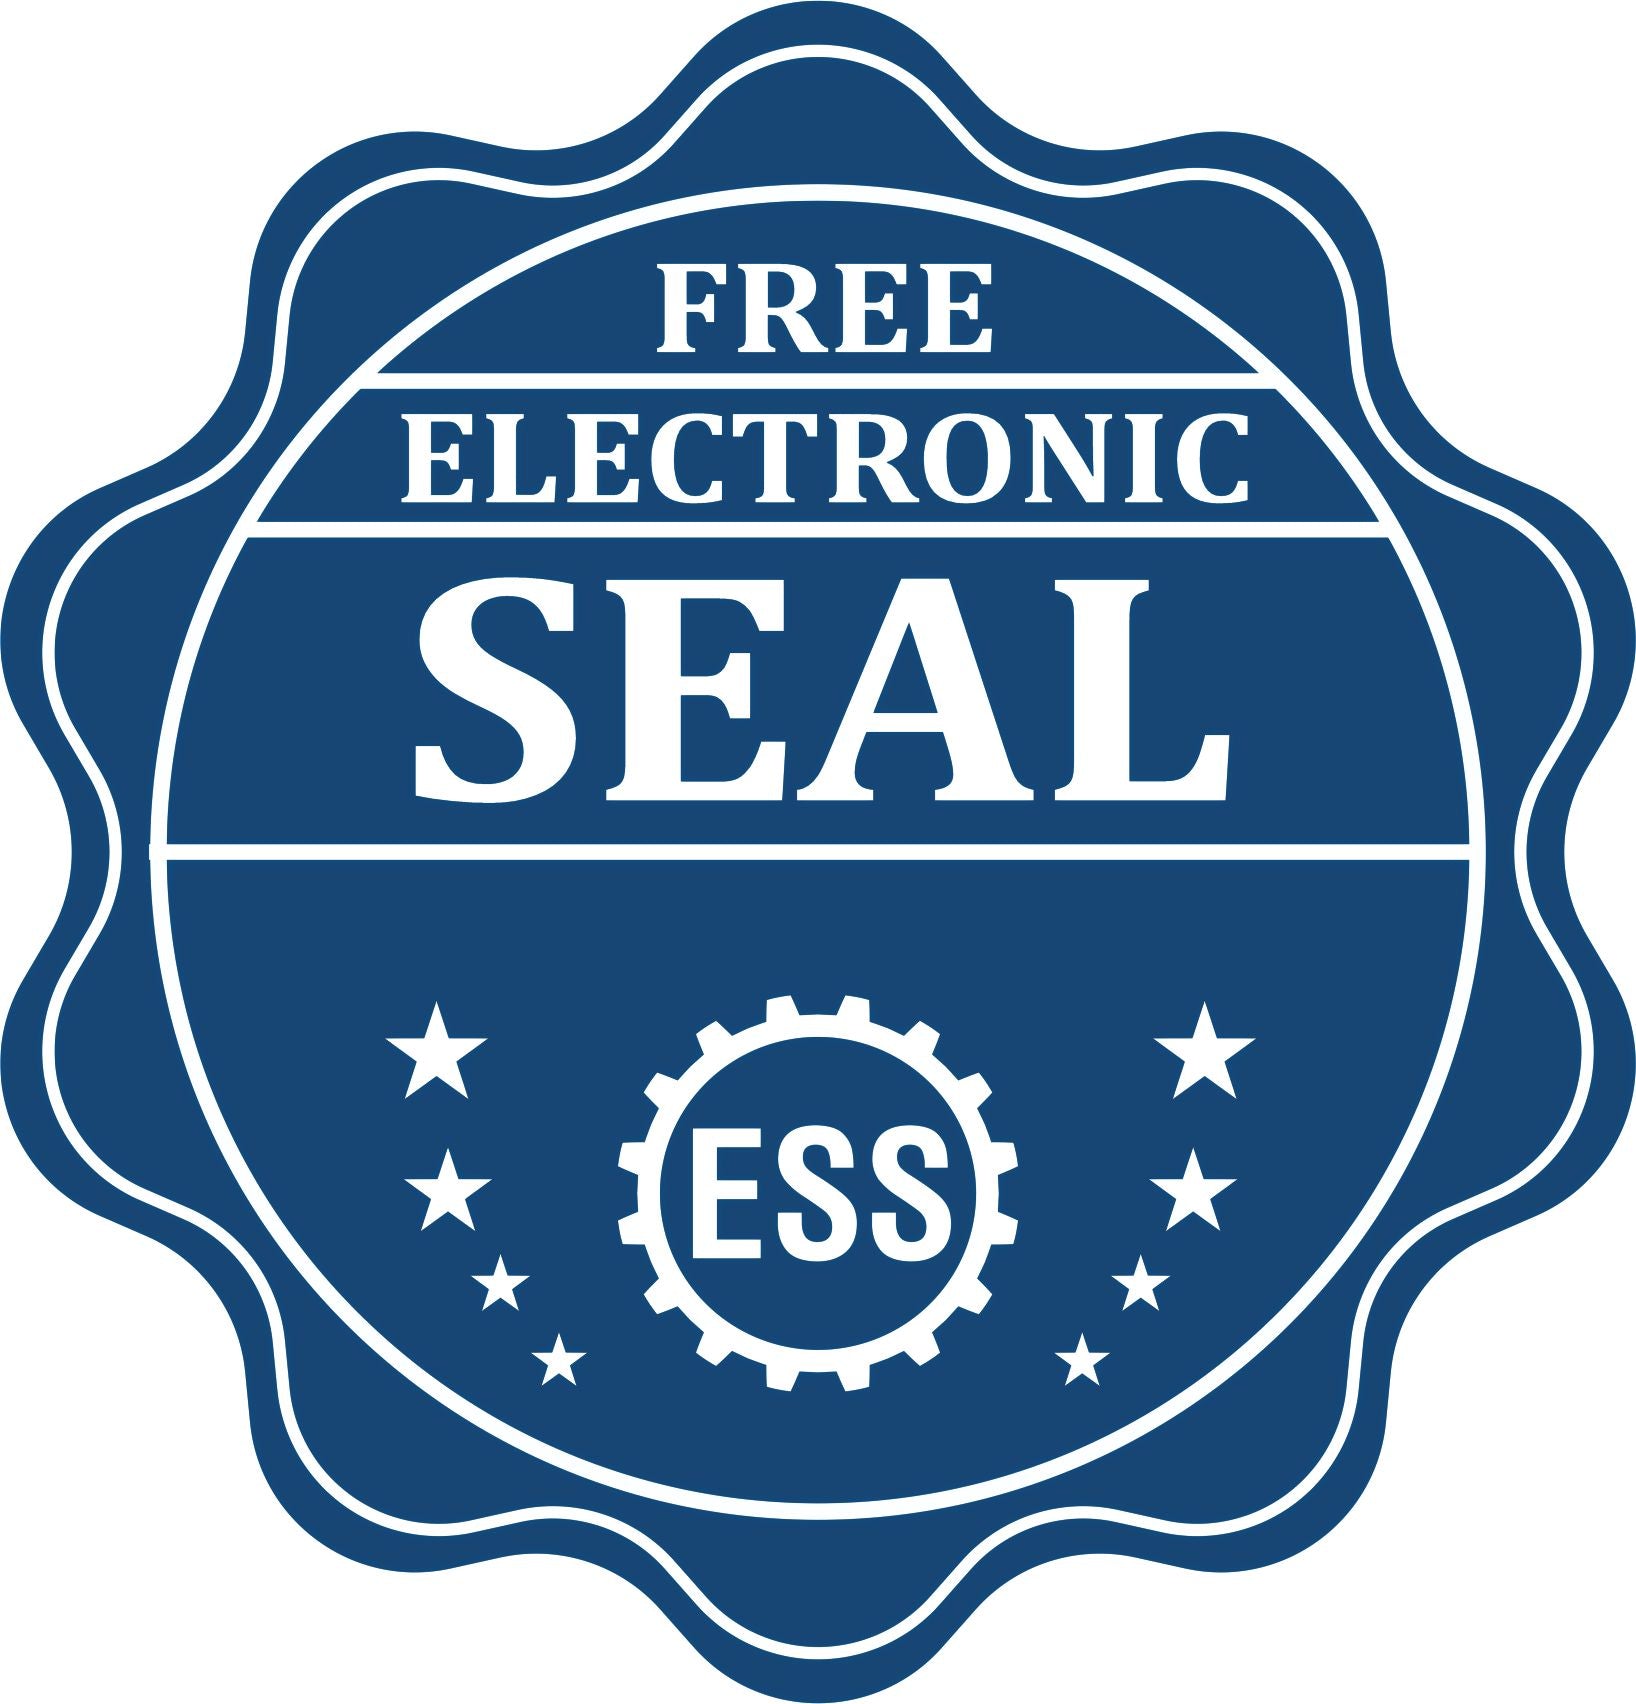 A badge showing a free electronic seal for the Gift Kansas Land Surveyor Seal with stars and the ESS gear on the emblem.